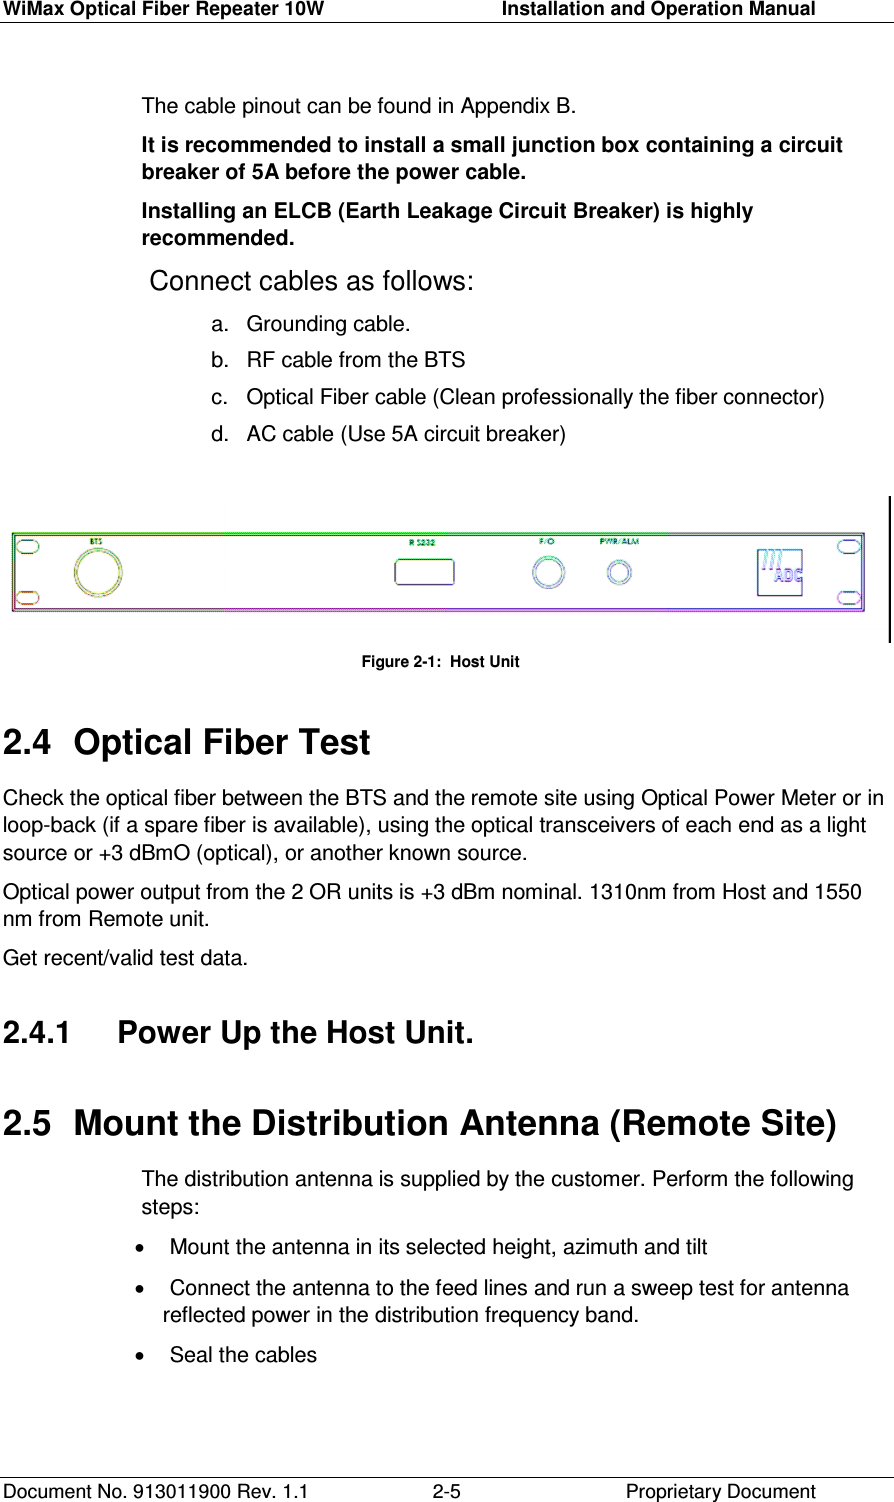 WiMax Optical Fiber Repeater 10W     Installation and Operation Manual Document No. 913011900 Rev. 1.1    Proprietary Document  2-5The cable pinout can be found in Appendix B. It is recommended to install a small junction box containing a circuit breaker of 5A before the power cable. Installing an ELCB (Earth Leakage Circuit Breaker) is highly recommended.  Connect cables as follows: a.  Grounding cable. b.  RF cable from the BTS c.  Optical Fiber cable (Clean professionally the fiber connector) d.  AC cable (Use 5A circuit breaker)                            Figure     2-1:  Host Unit 2.4  Optical Fiber Test Check the optical fiber between the BTS and the remote site using Optical Power Meter or in loop-back (if a spare fiber is available), using the optical transceivers of each end as a light source or +3 dBmO (optical), or another known source.  Optical power output from the 2 OR units is +3 dBm nominal. 1310nm from Host and 1550 nm from Remote unit.  Get recent/valid test data. 2.4.1   Power Up the Host Unit. 2.5  Mount the Distribution Antenna (Remote Site) The distribution antenna is supplied by the customer. Perform the following steps: •  Mount the antenna in its selected height, azimuth and tilt •  Connect the antenna to the feed lines and run a sweep test for antenna reflected power in the distribution frequency band. •  Seal the cables 